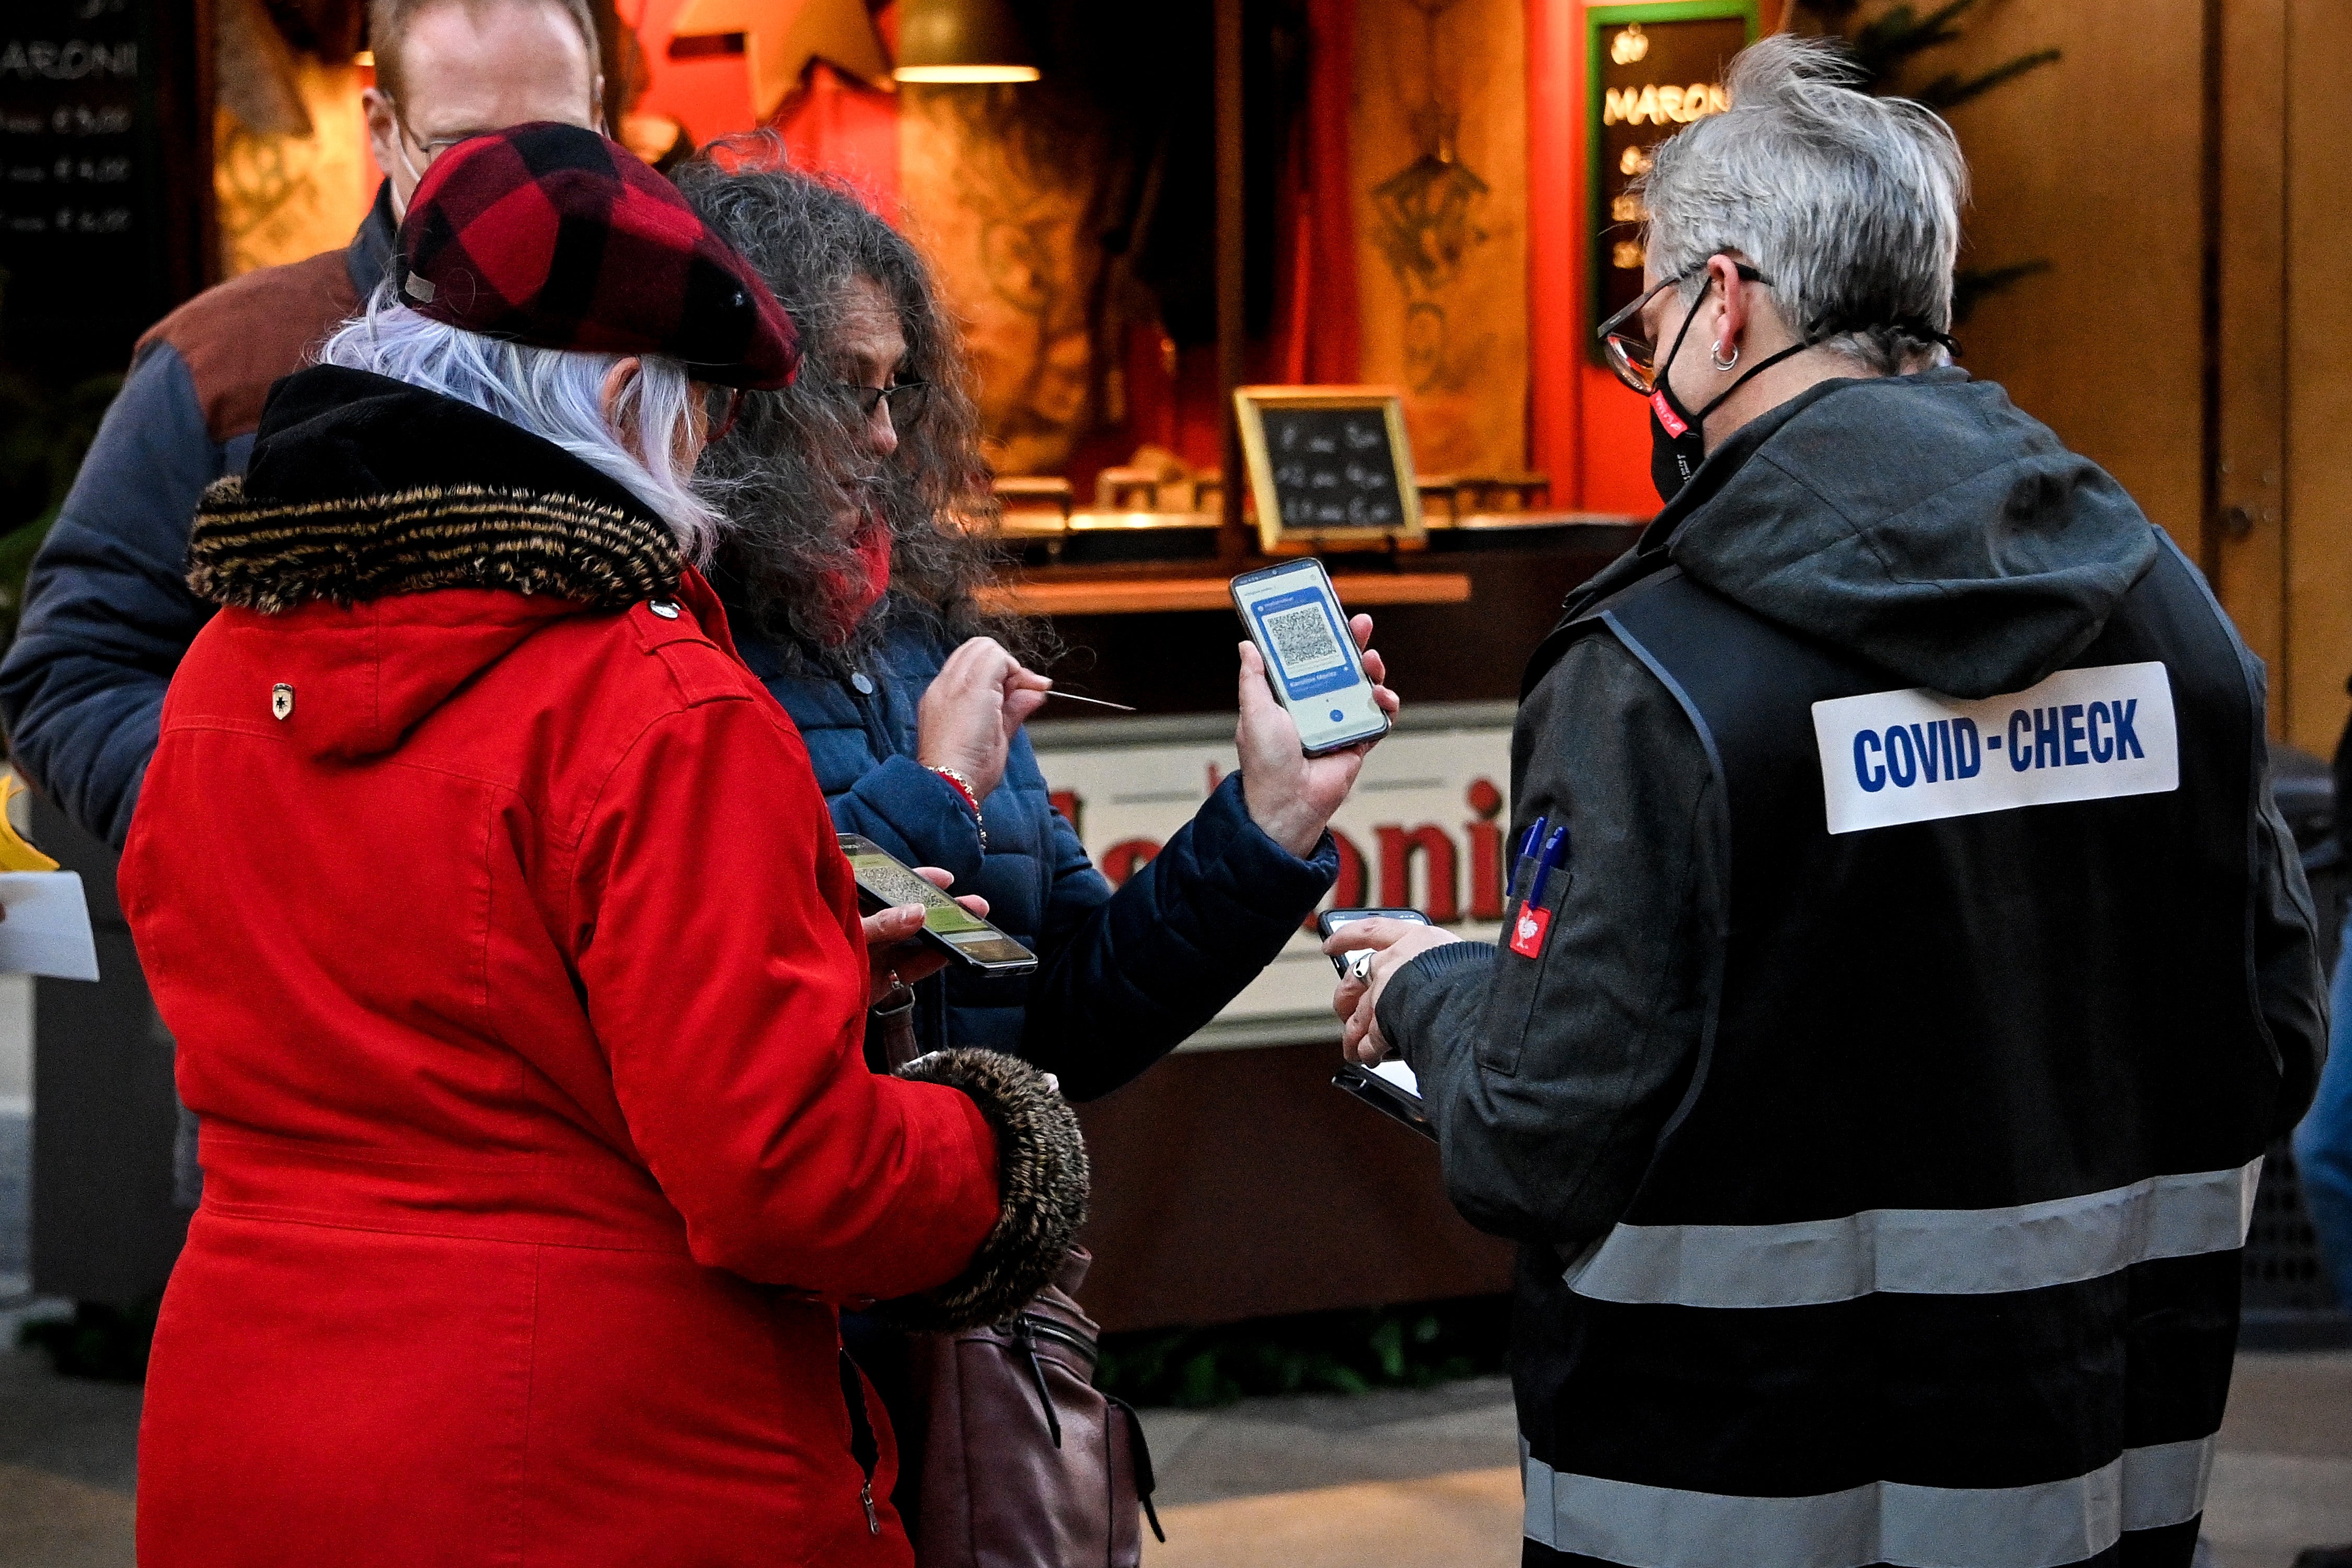 A ‘Covid-Check’ inspector checks digital vaccination certificates on smartphones of people in Cologne, Germany, 22 November 2021